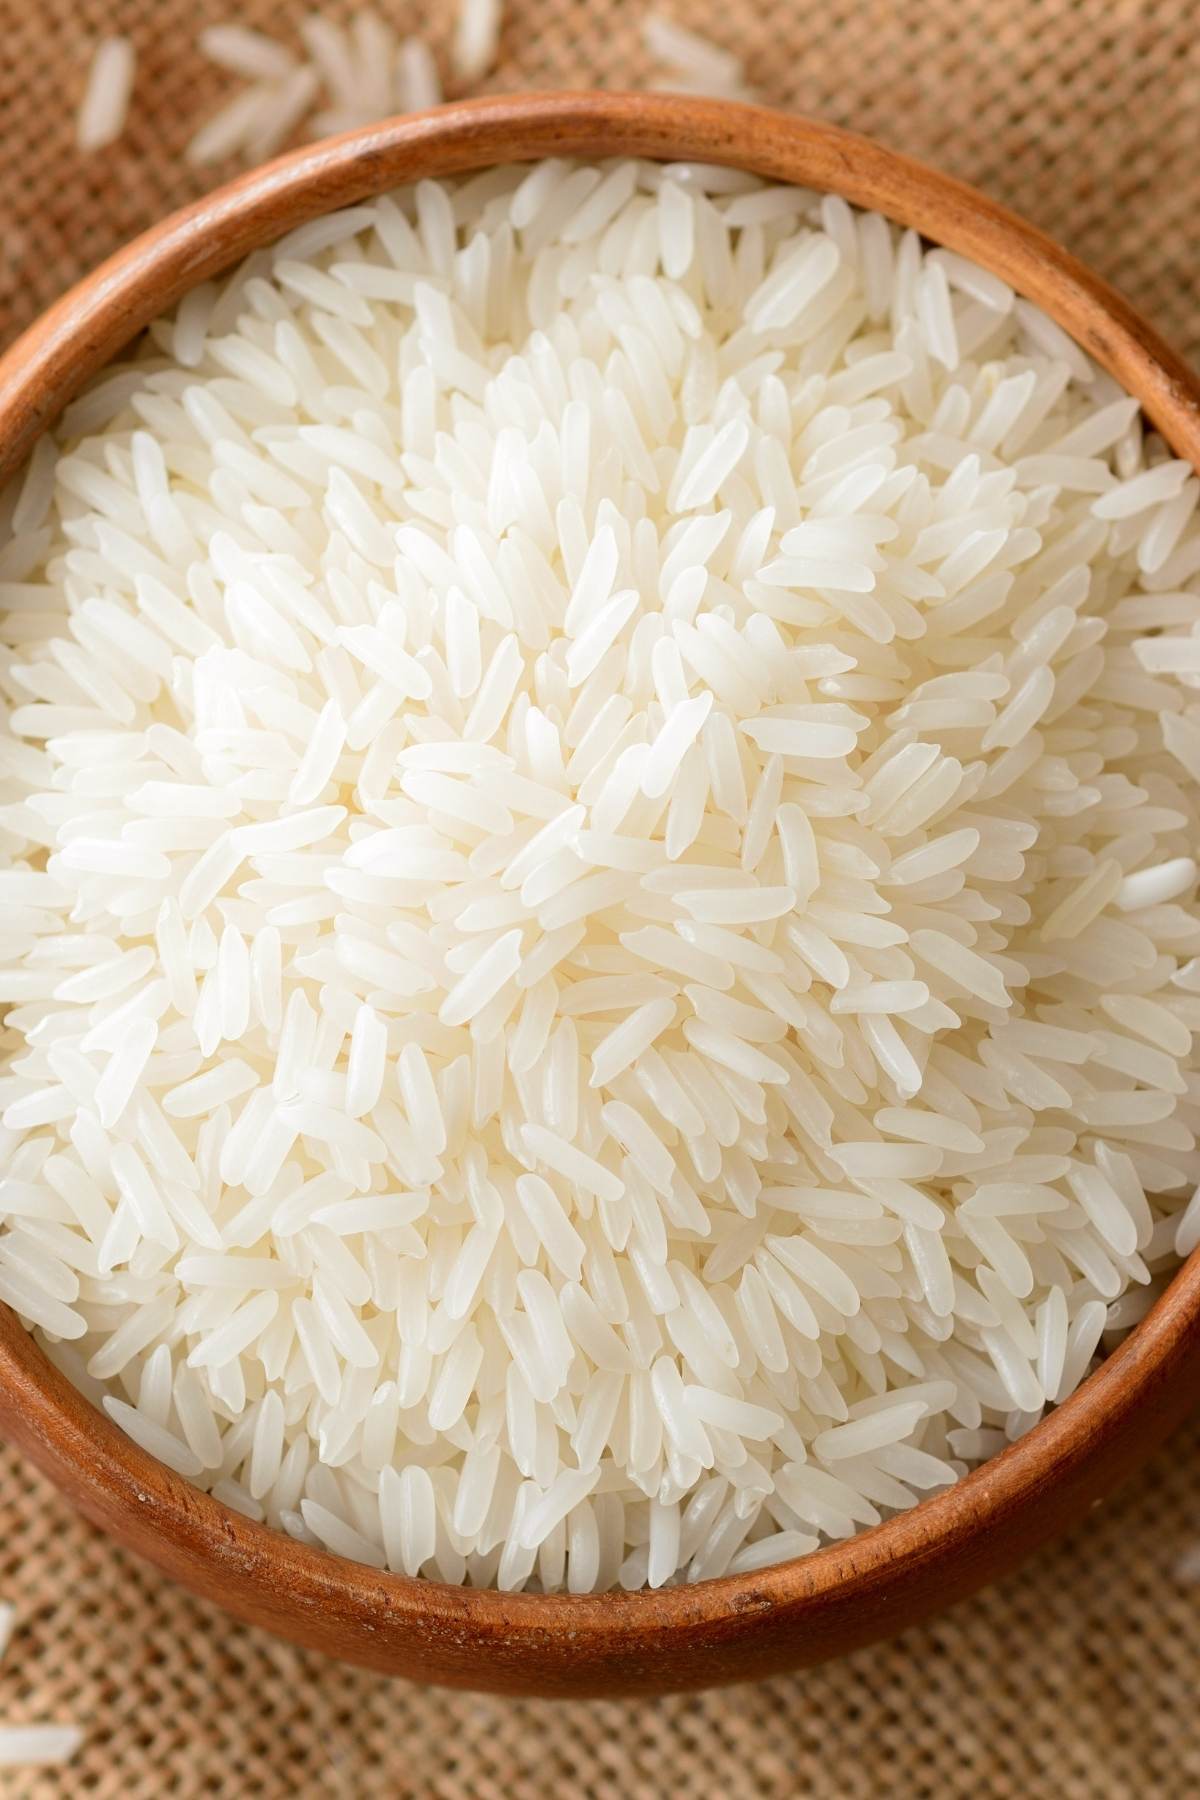 Two of the more popular varieties include basmati and jasmine rice. They look similar and one is often confused for the other. However, after reading this article you’d be able to tell the difference, know exactly how to cook them, and have a few recipes to try out at home.